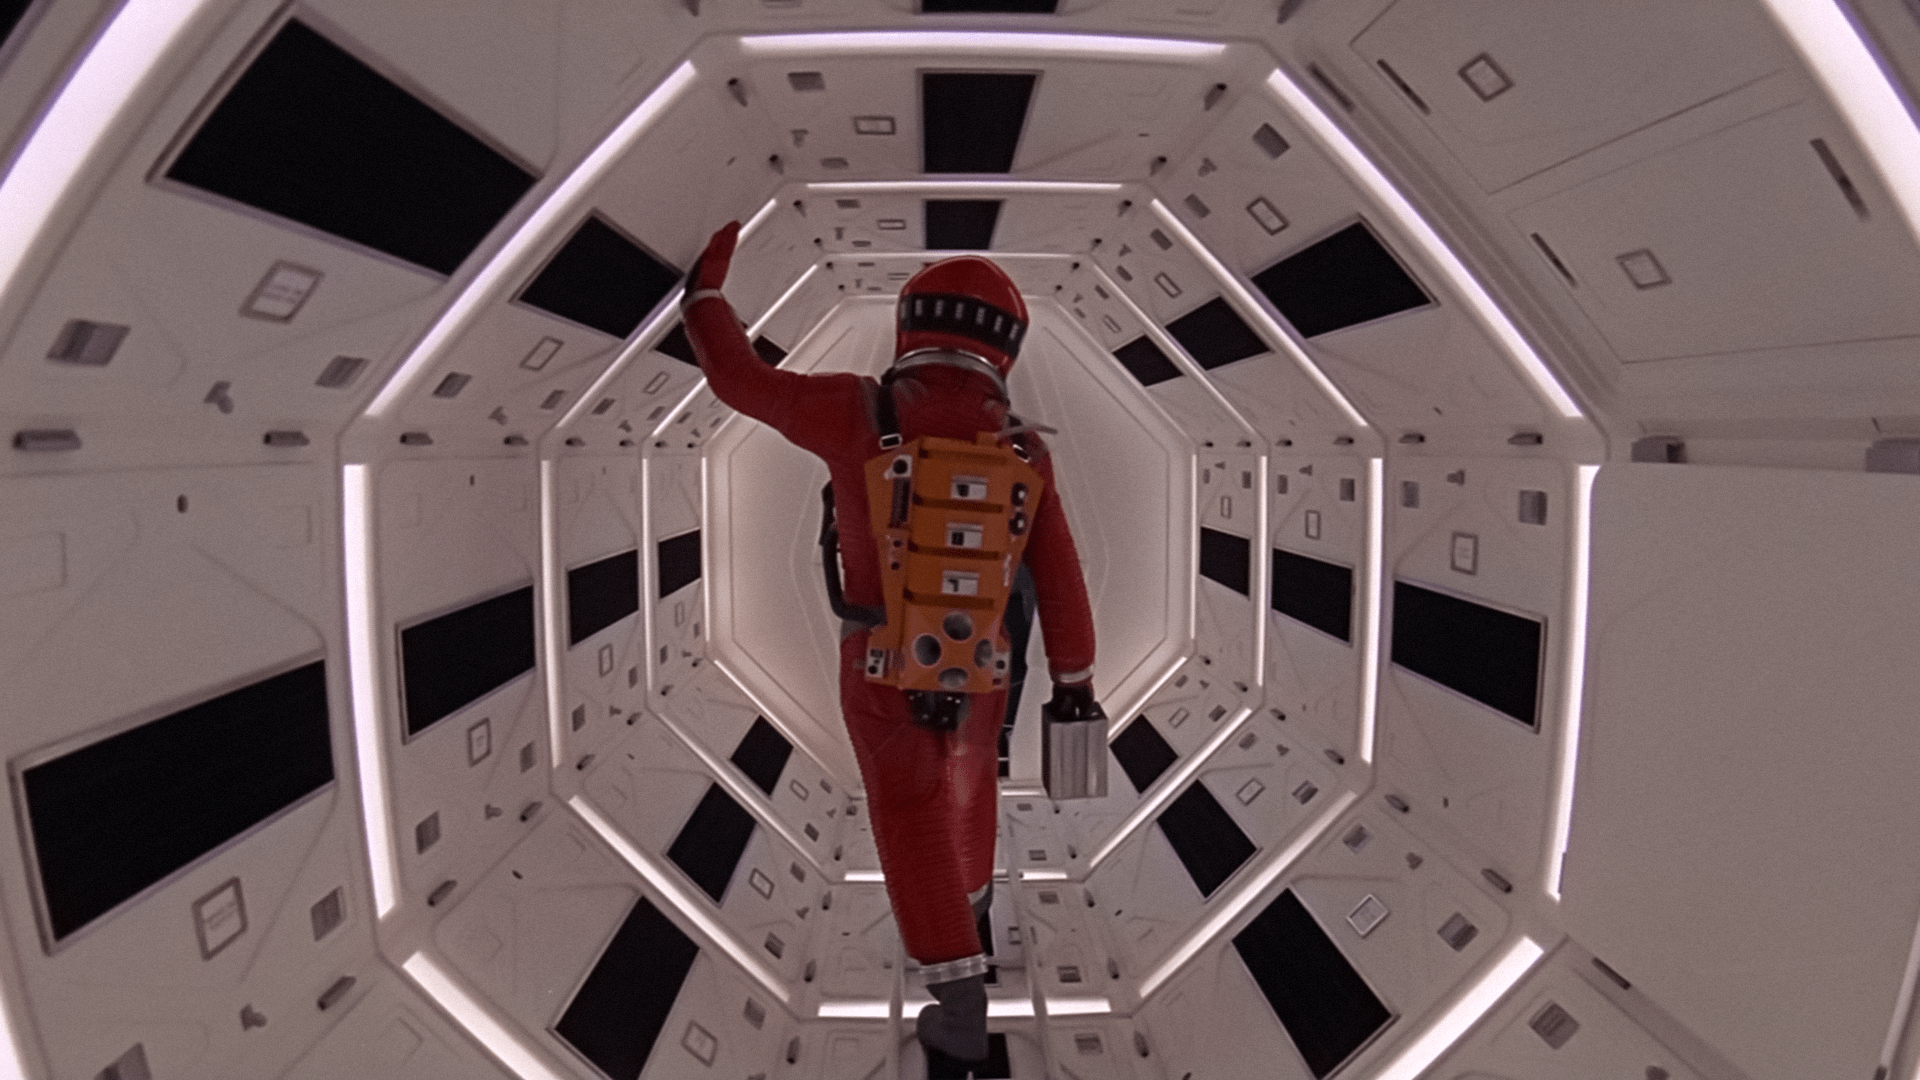 2001: A Space Odyssey Wallpapers - Top Free 2001: A Space Odyssey